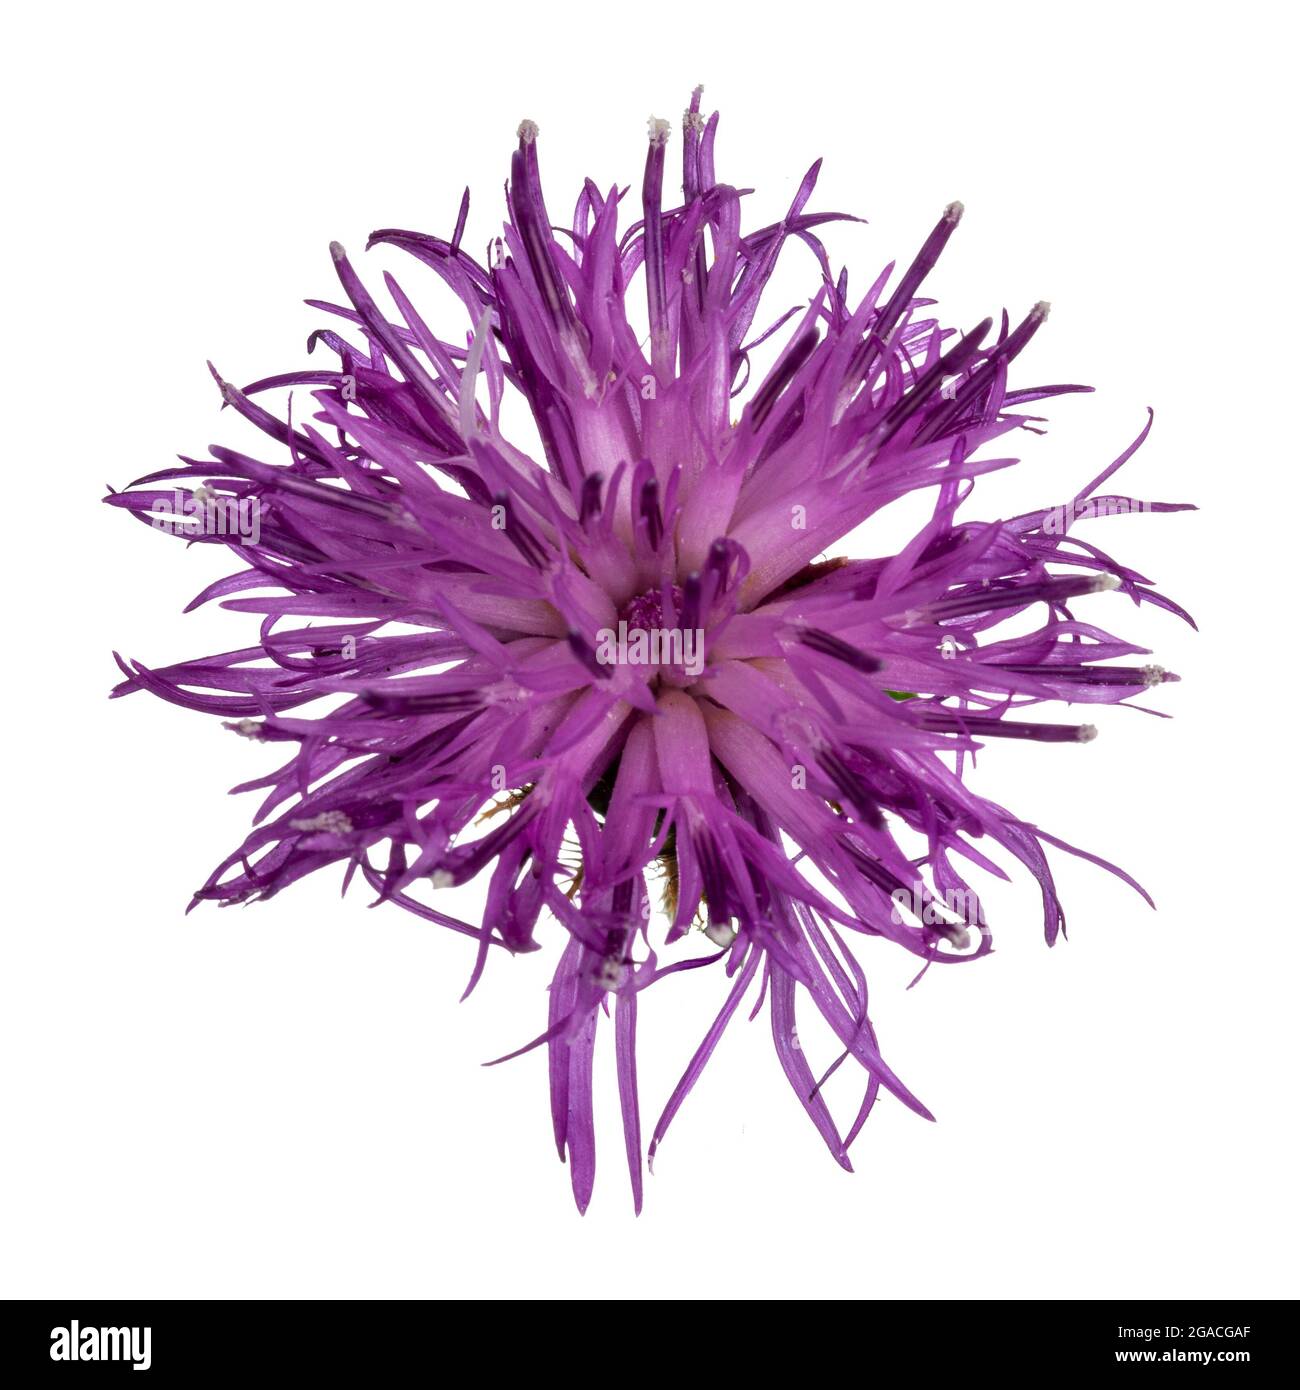 Top view of Brownray Knapweed aka Centaurea jacea. Single pink flower on green stem. Isolated on a white background. Stock Photo